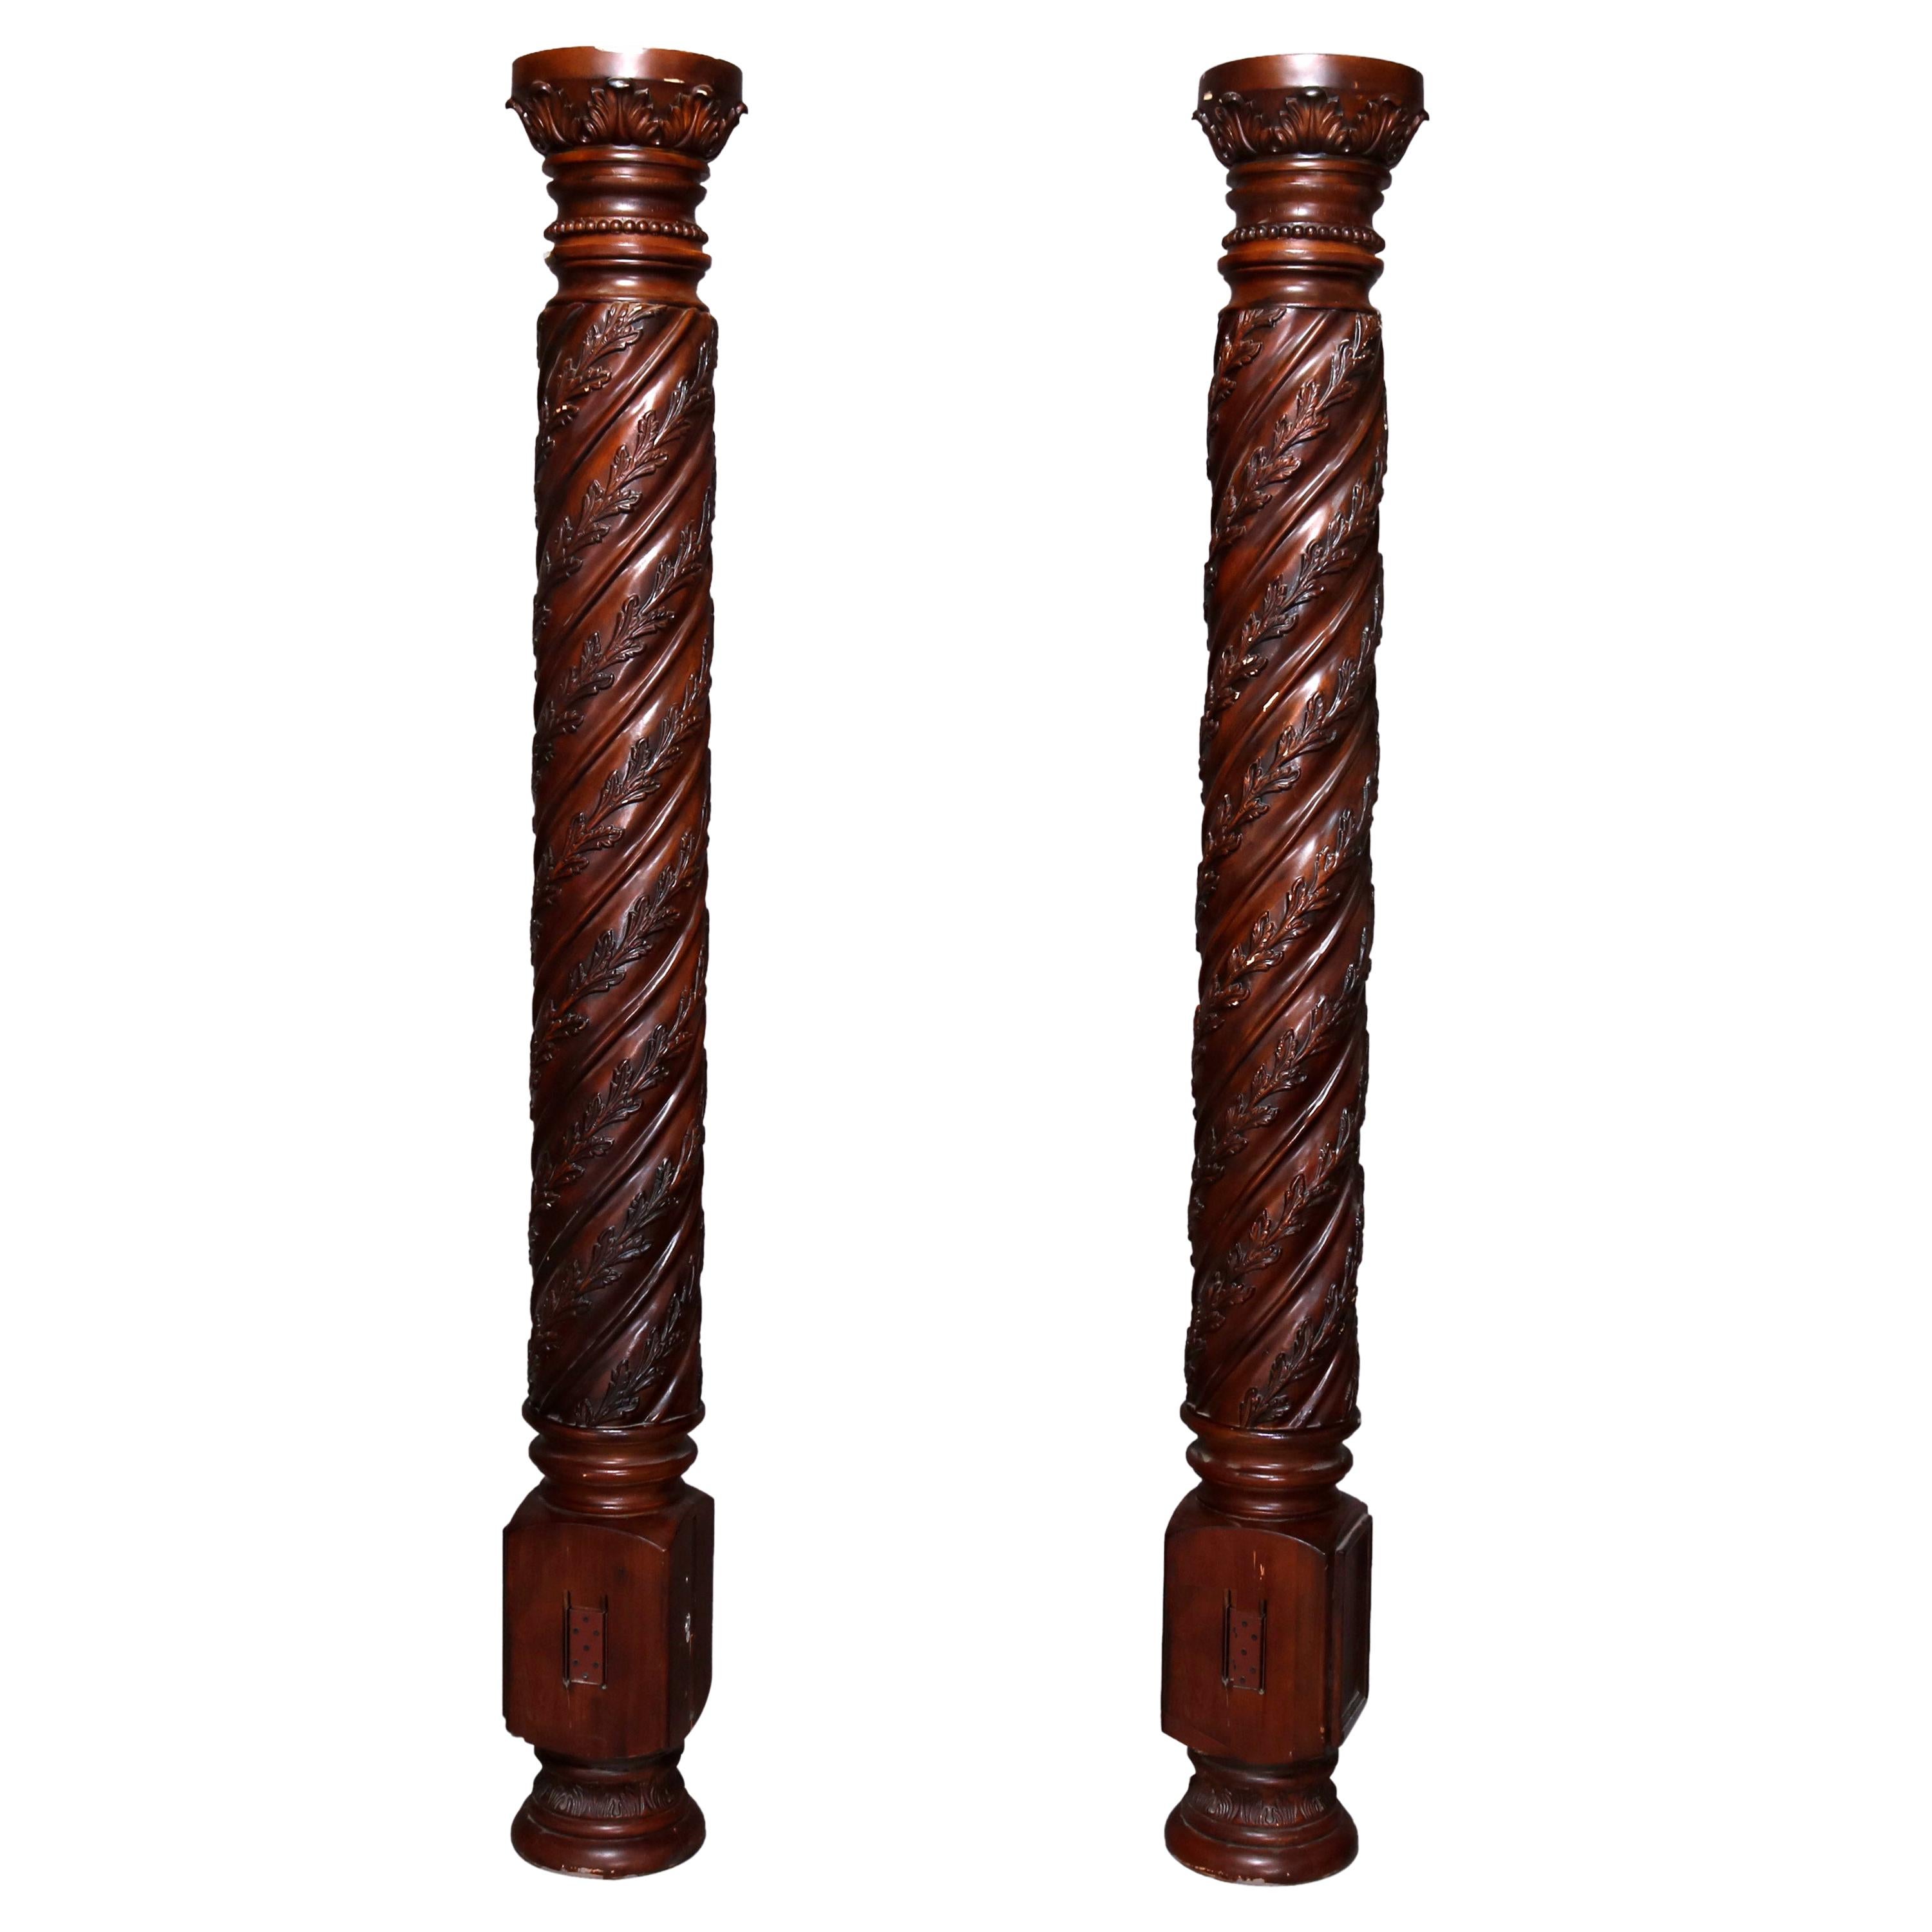 Pair of Oversized Mahogany and Composite Architectural Columns, 20th Century